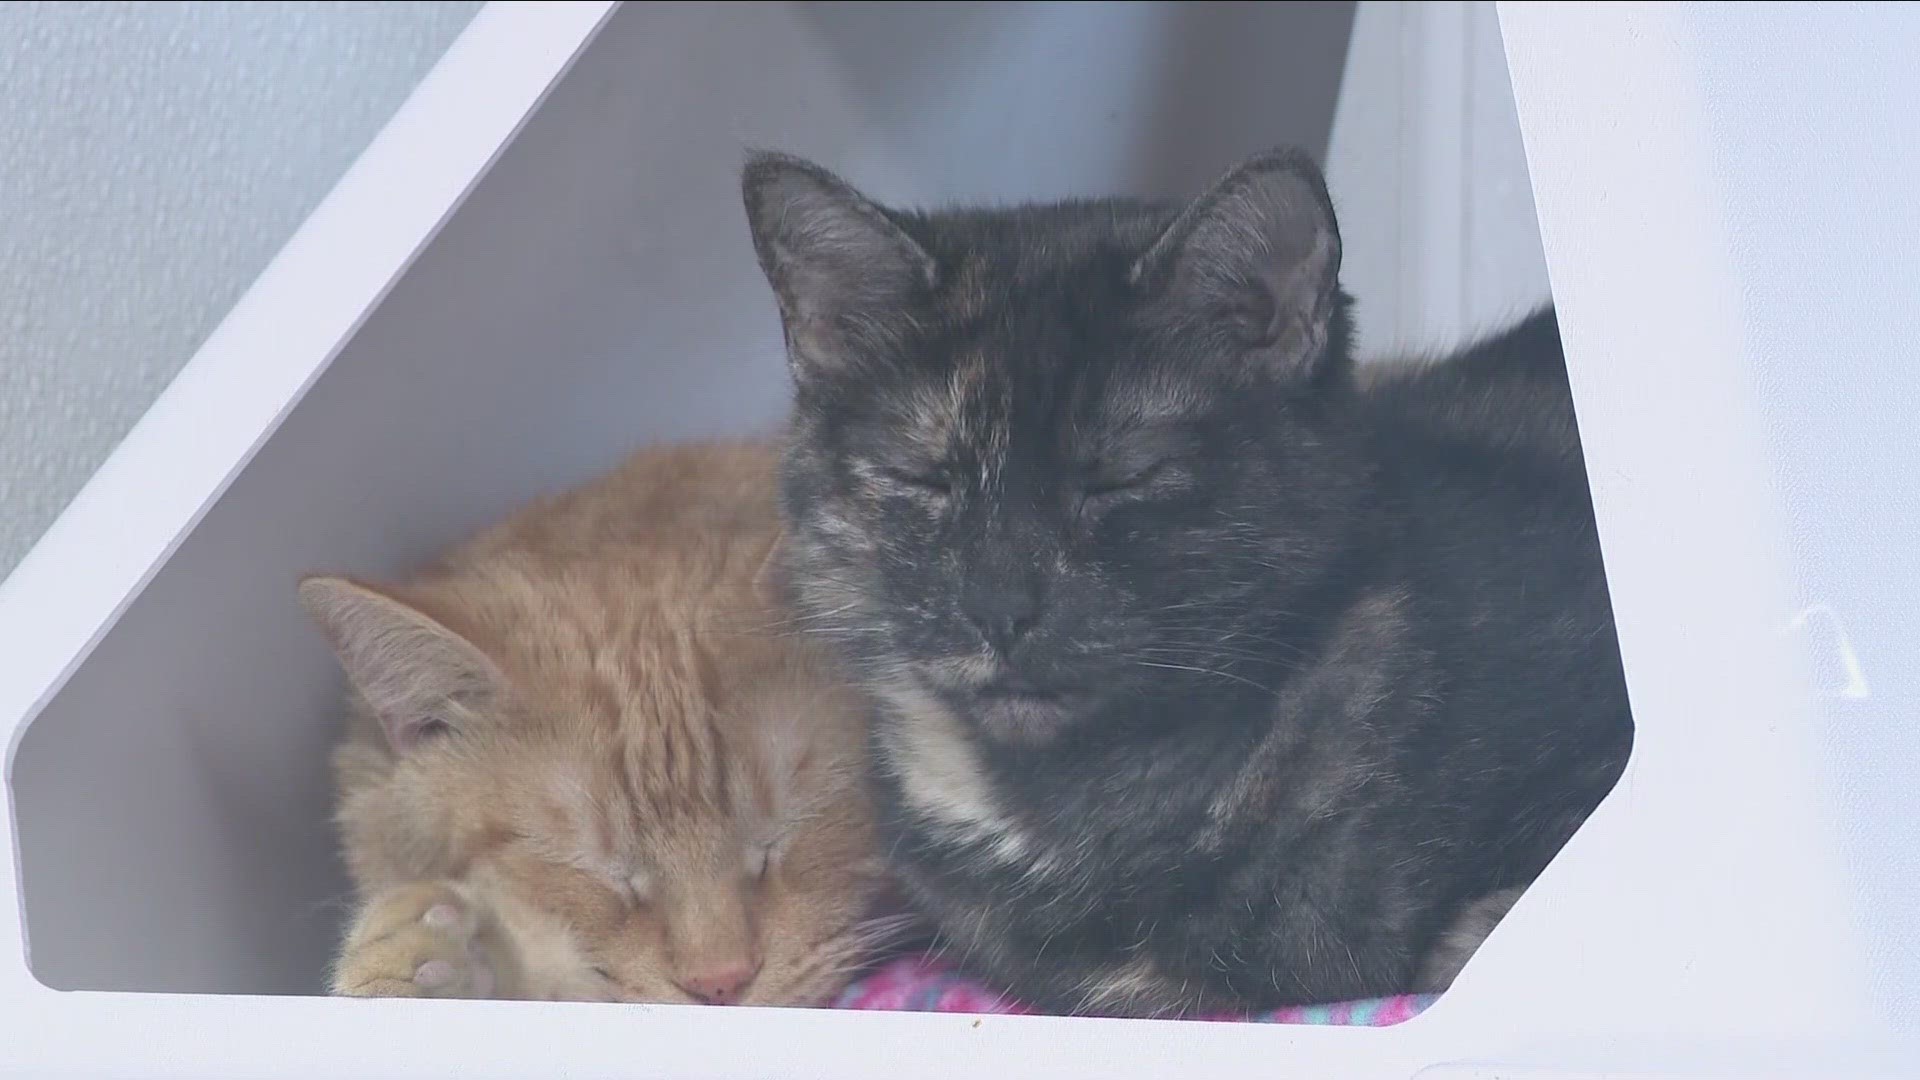 The SPCA Serving Erie County is looking for more people to help out as fosters for their rescue animals.